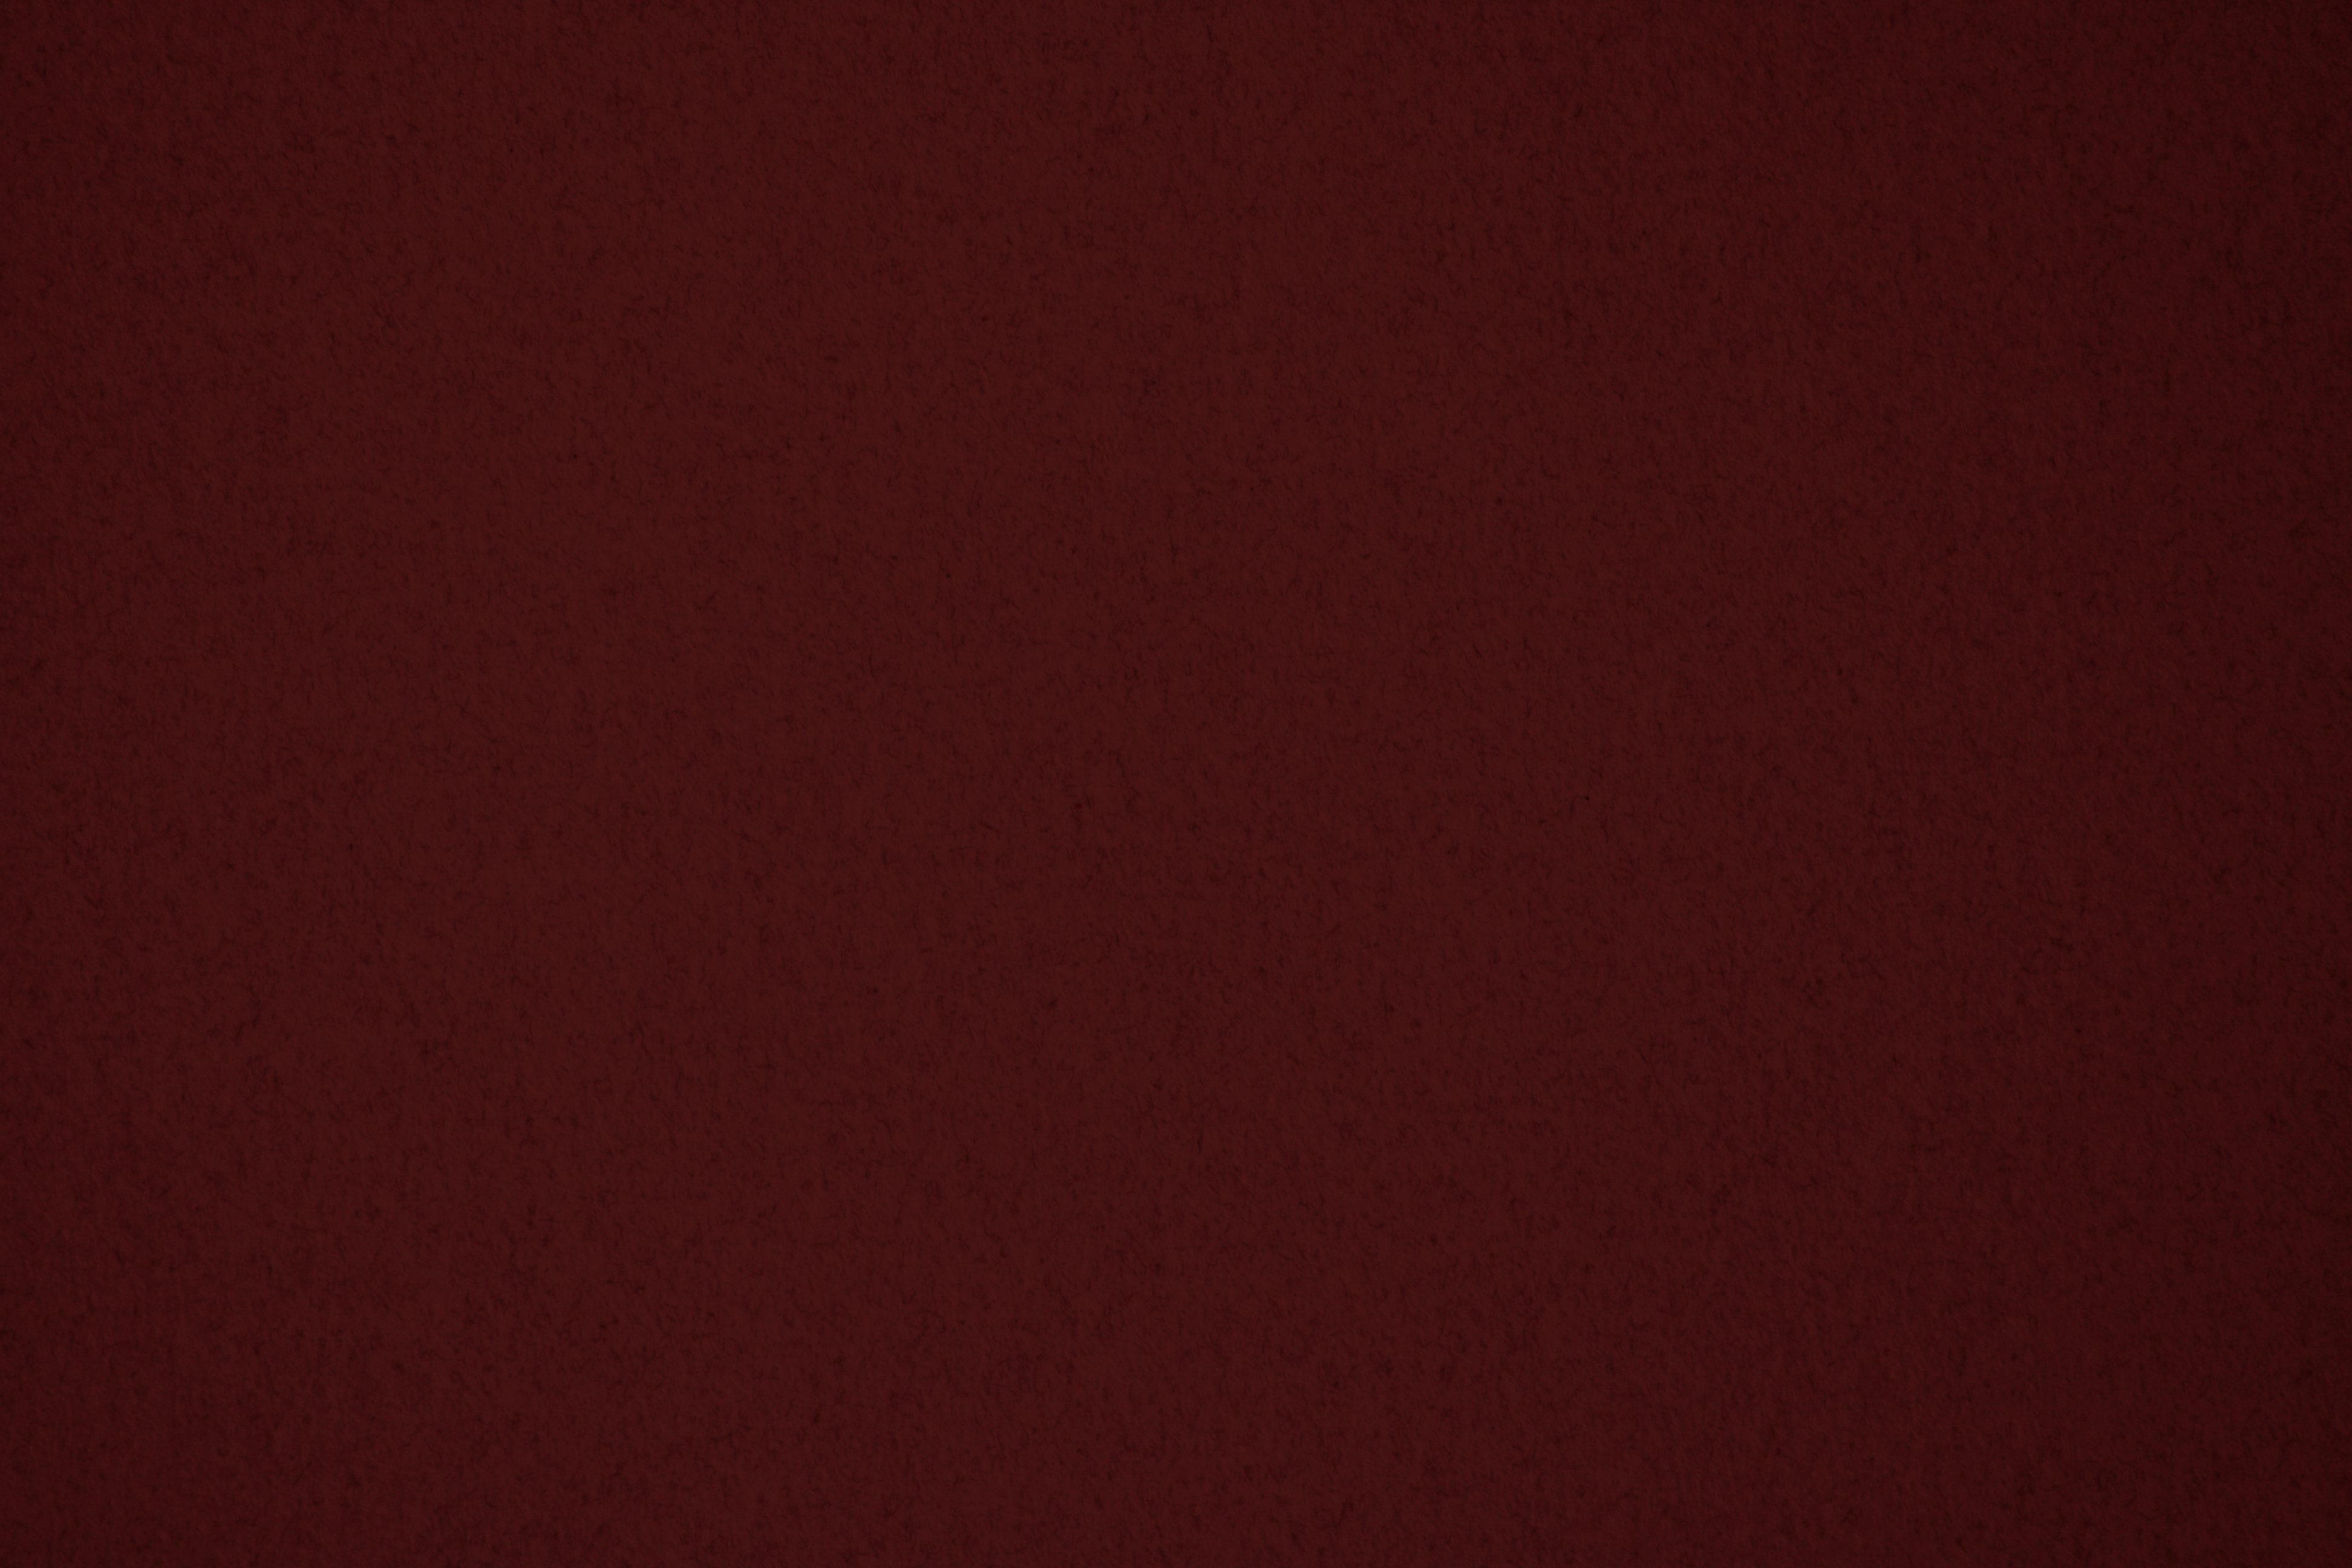 Maroon Paper Texture High Resolution Photo Dimensions